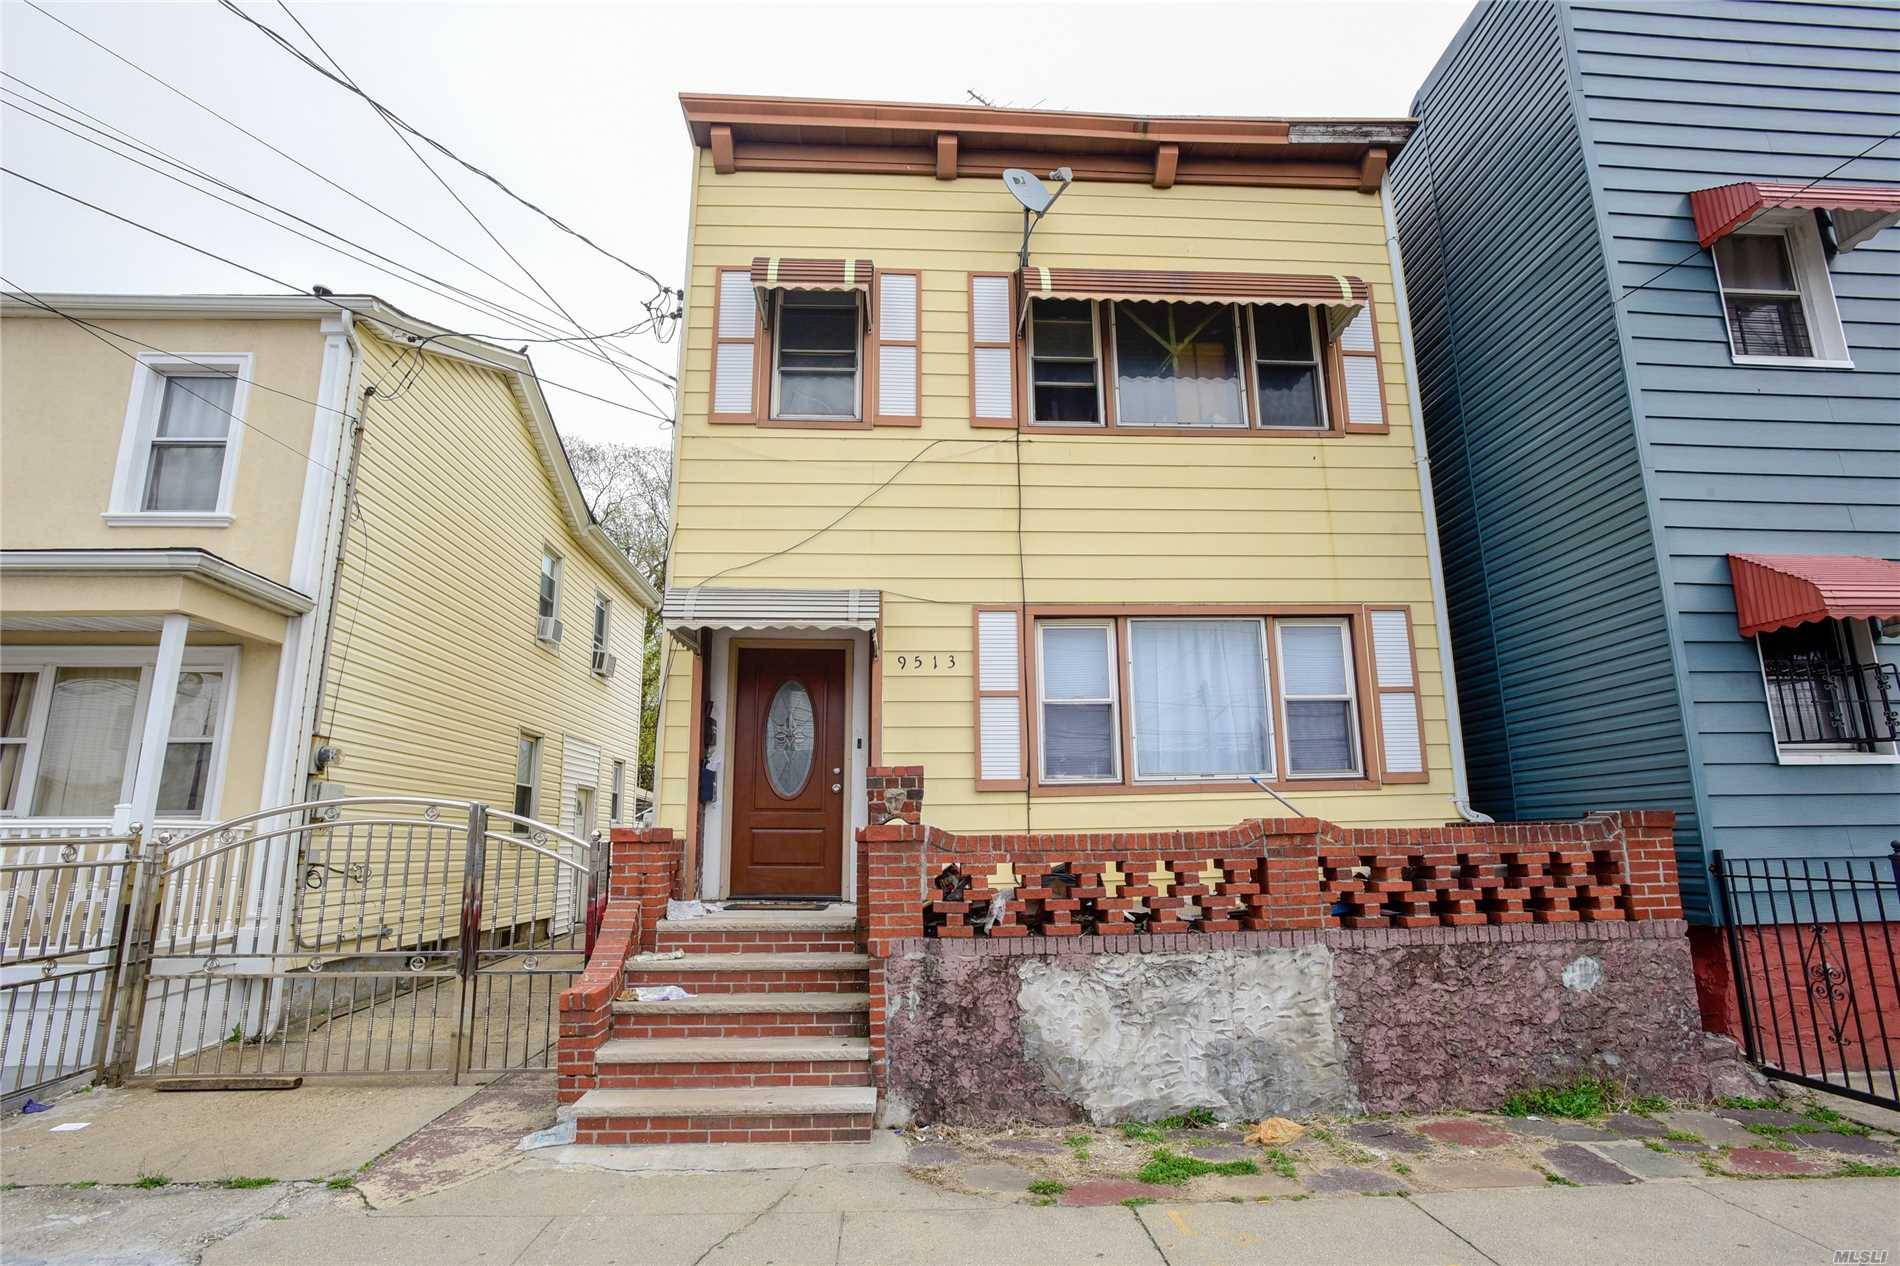 Well priced 2 family investment property or primary residence in the heart of Ozone Park.